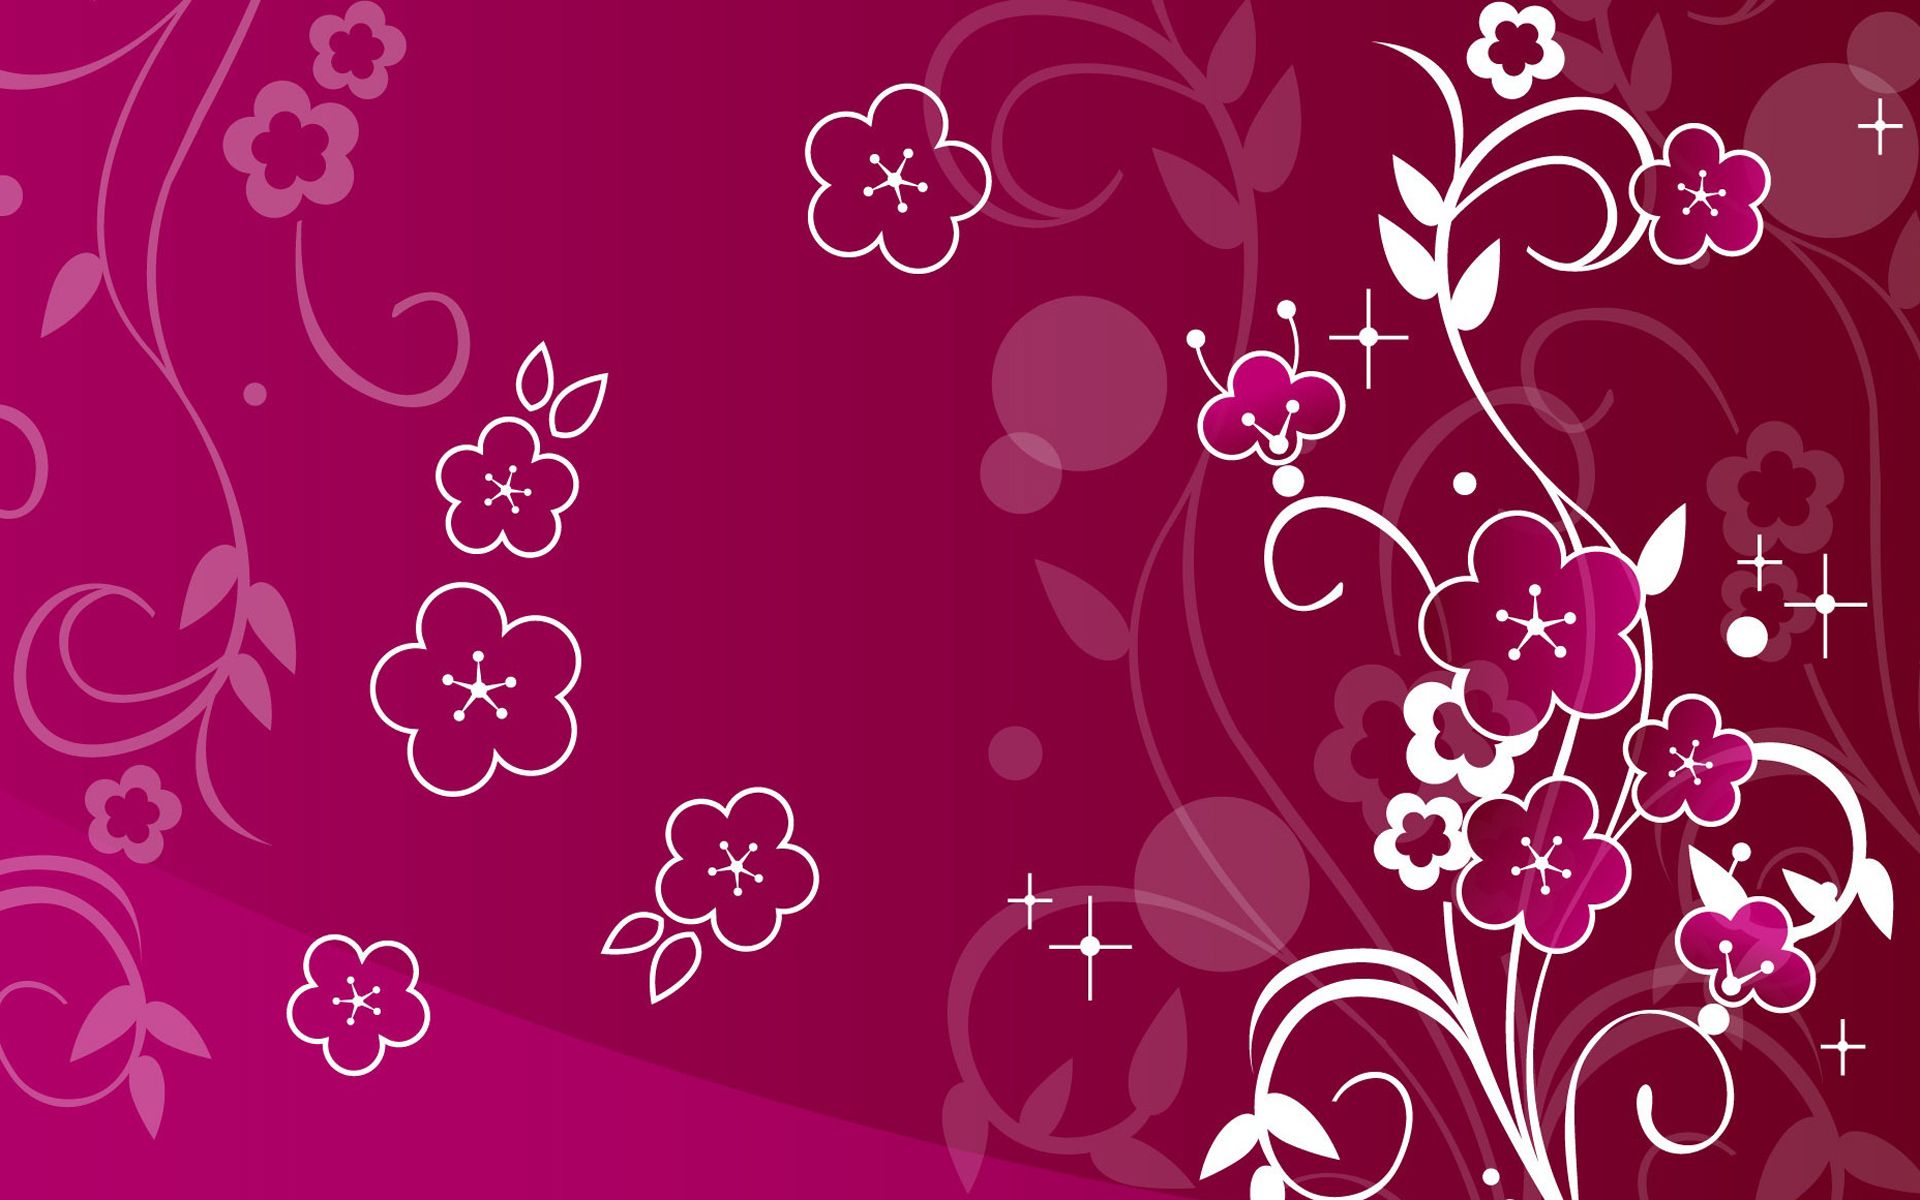 Flower backgrounds - AmusingFun.com Pictures and Graphics for